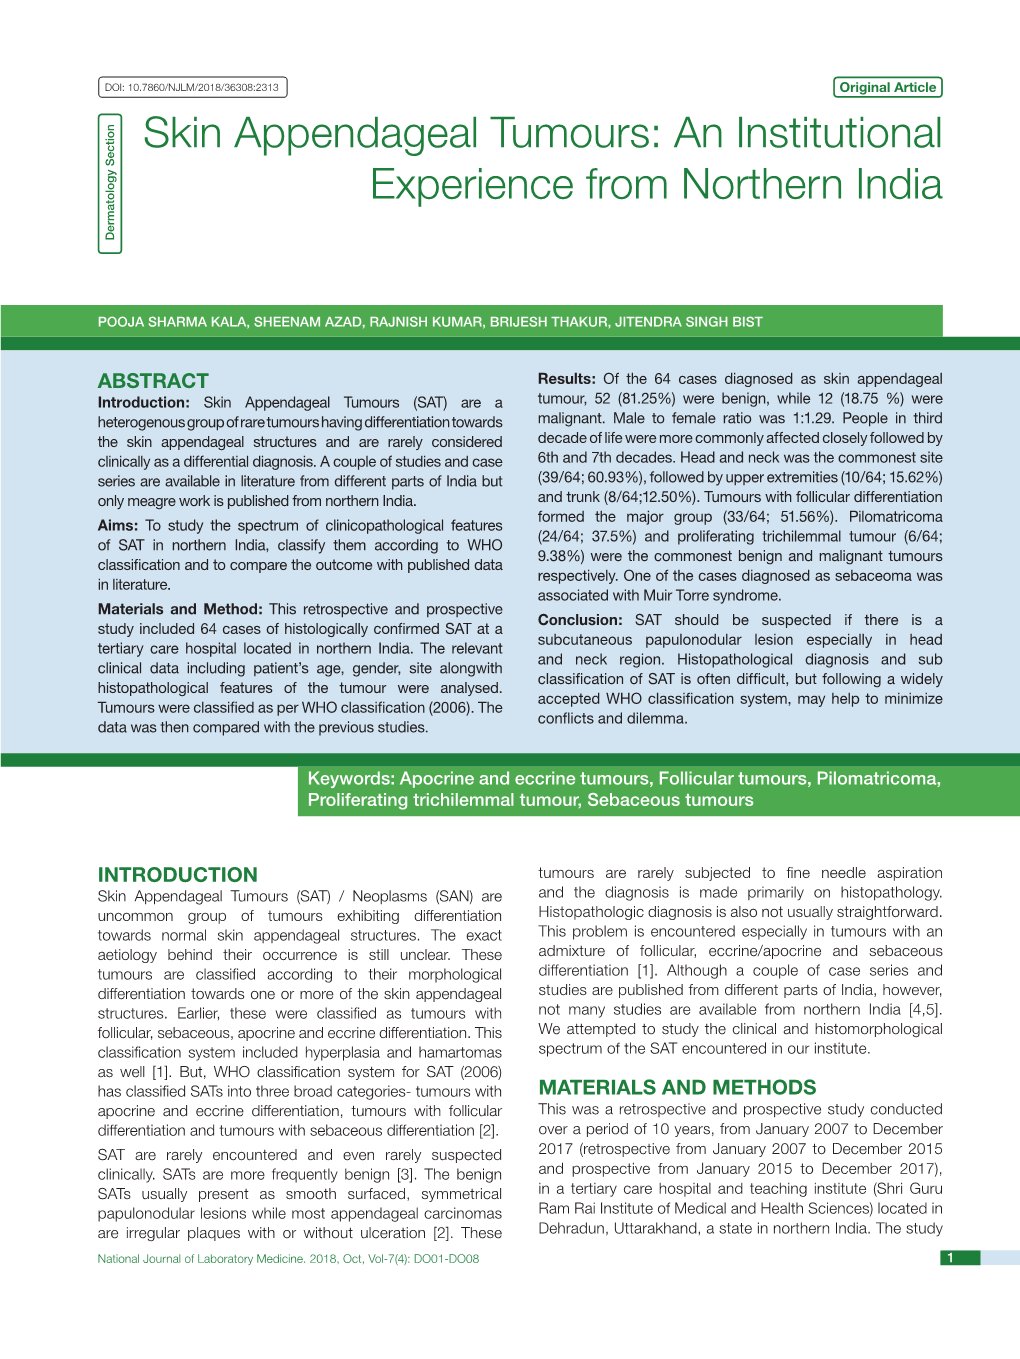 Skin Appendageal Tumours: an Institutional Experience from Northern India Dermatology Section